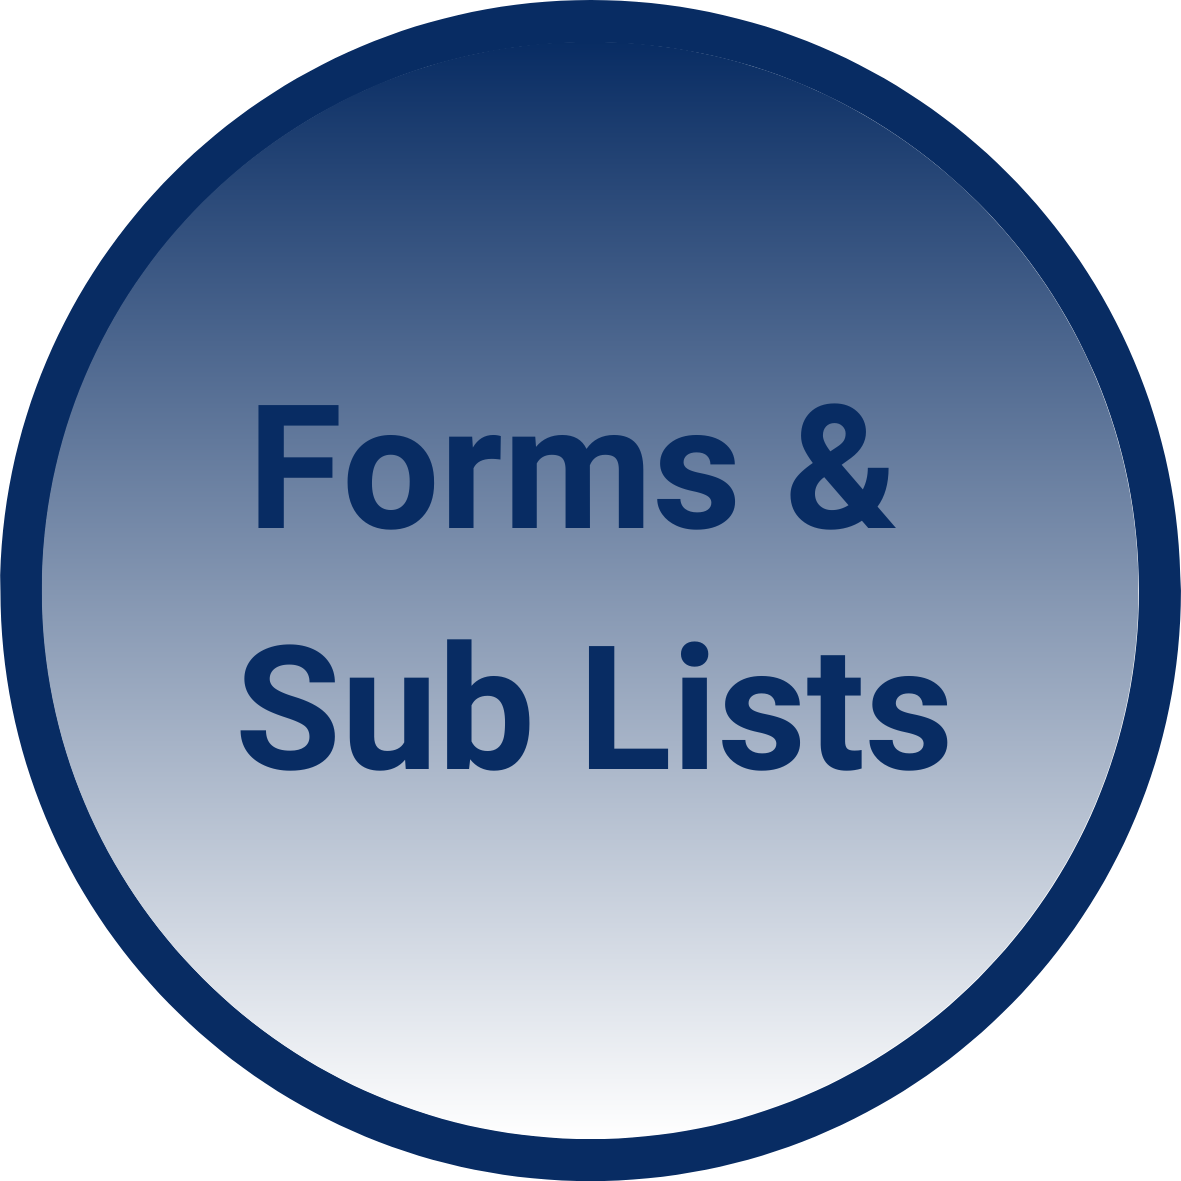 Forms & Sub Lists